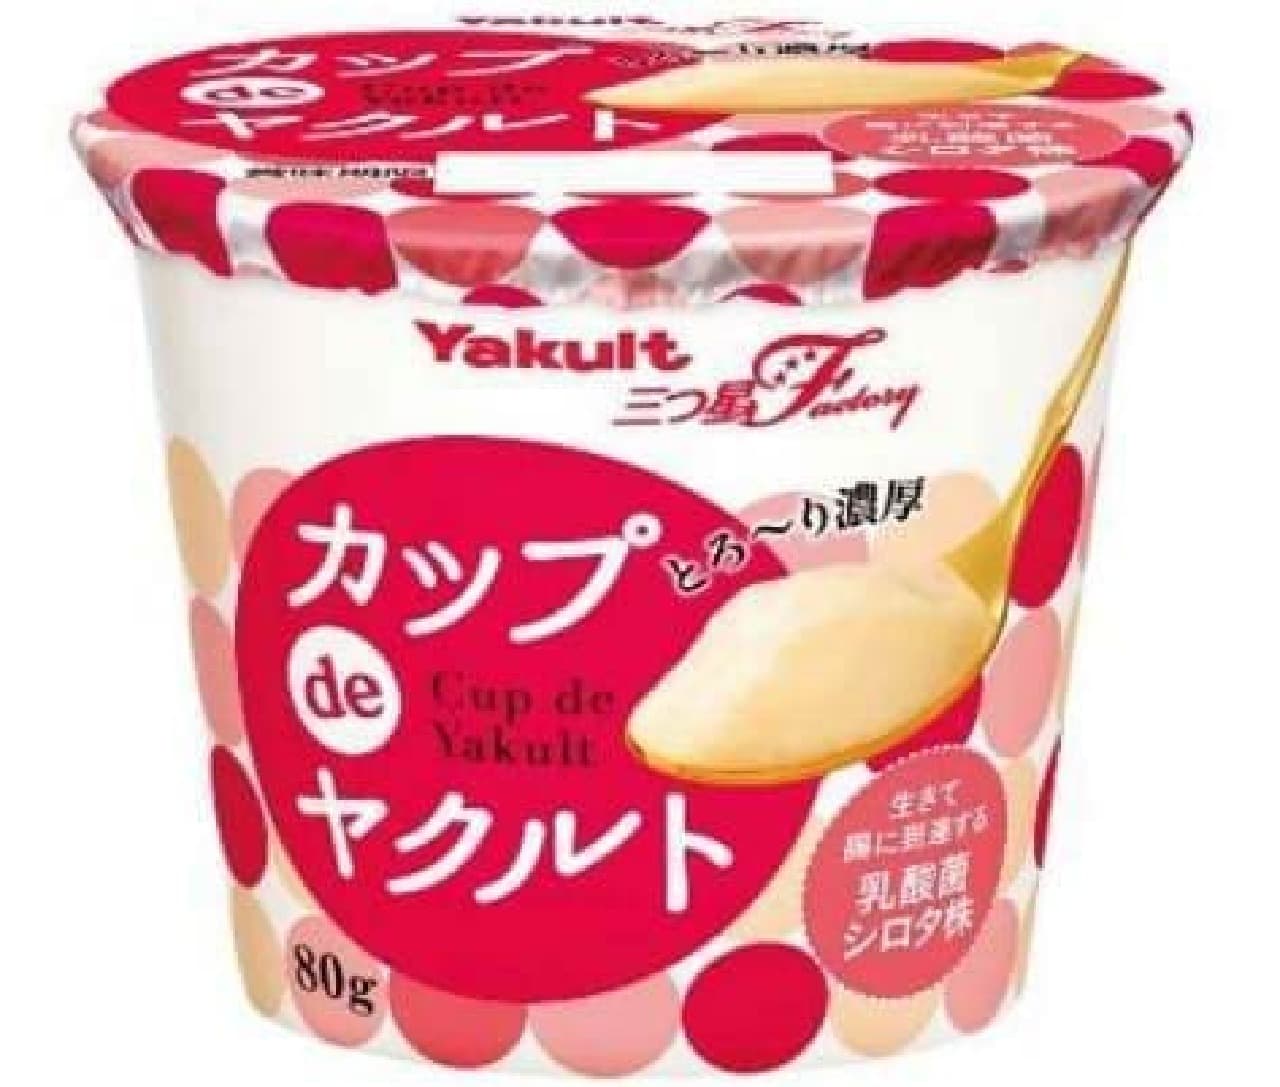 Yakult has become a cup dessert!